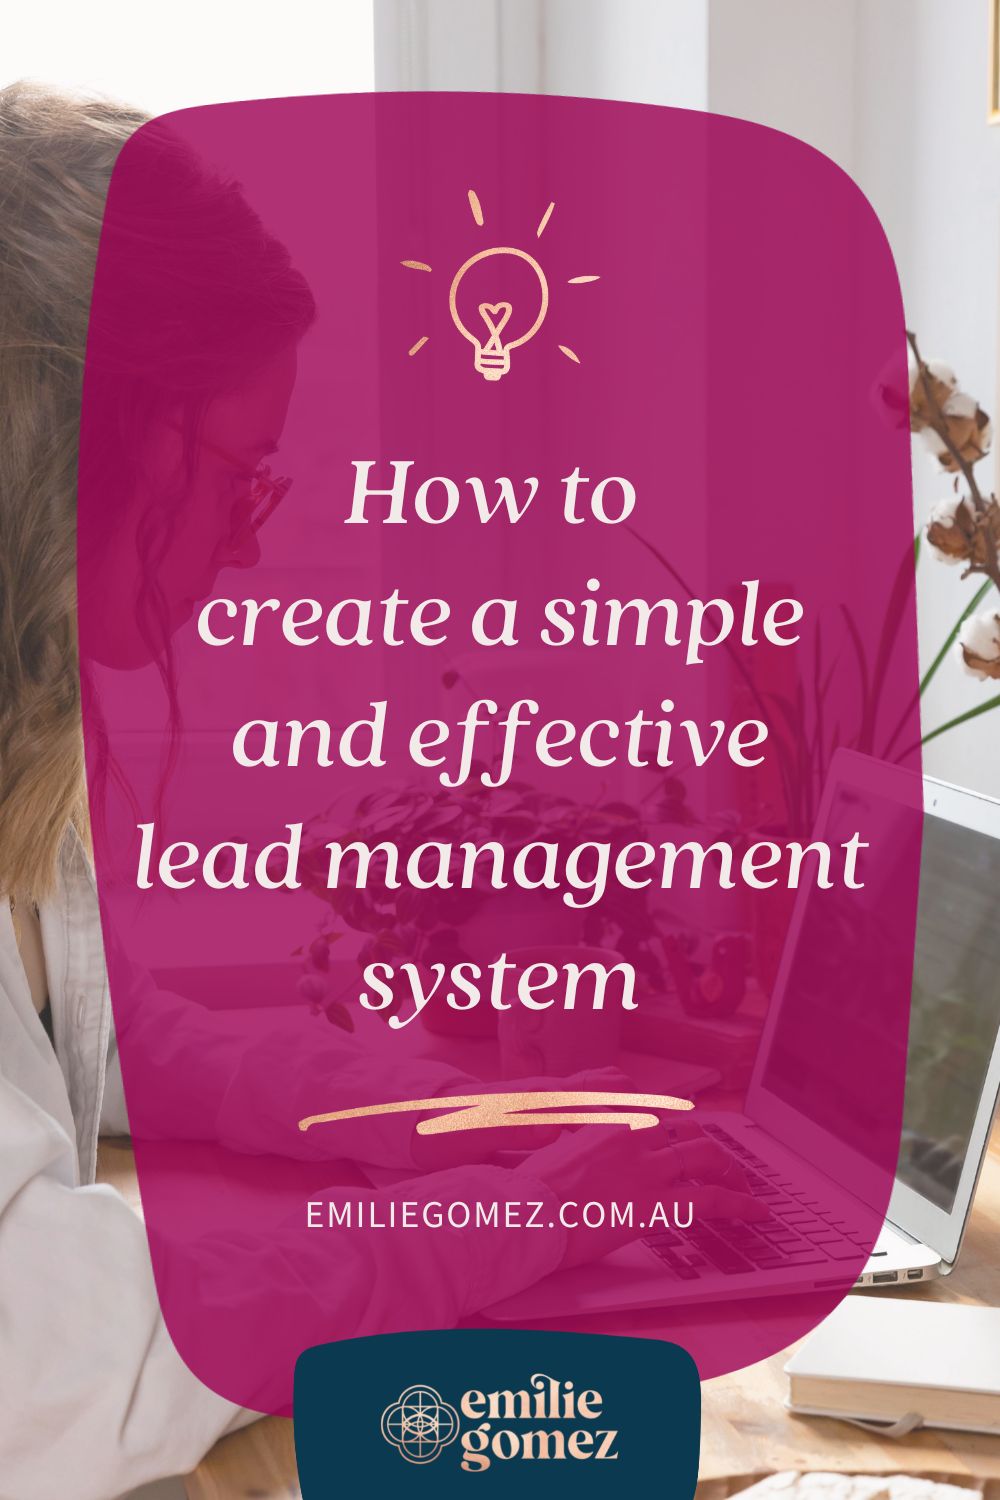 In this post, you’ll learn what a lead management system is and why you need one, even if your business is just you. You’ll discover the four parts you need to create a simple system to manage your leads effectively and ensure they turn into clients. Finally, you’ll learn what tools you can use – and, if you’re an online entrepreneur, the answer isn’t a CRM platform. Click through to learn all you need to know to create a simple and effective lead management system for your online business.